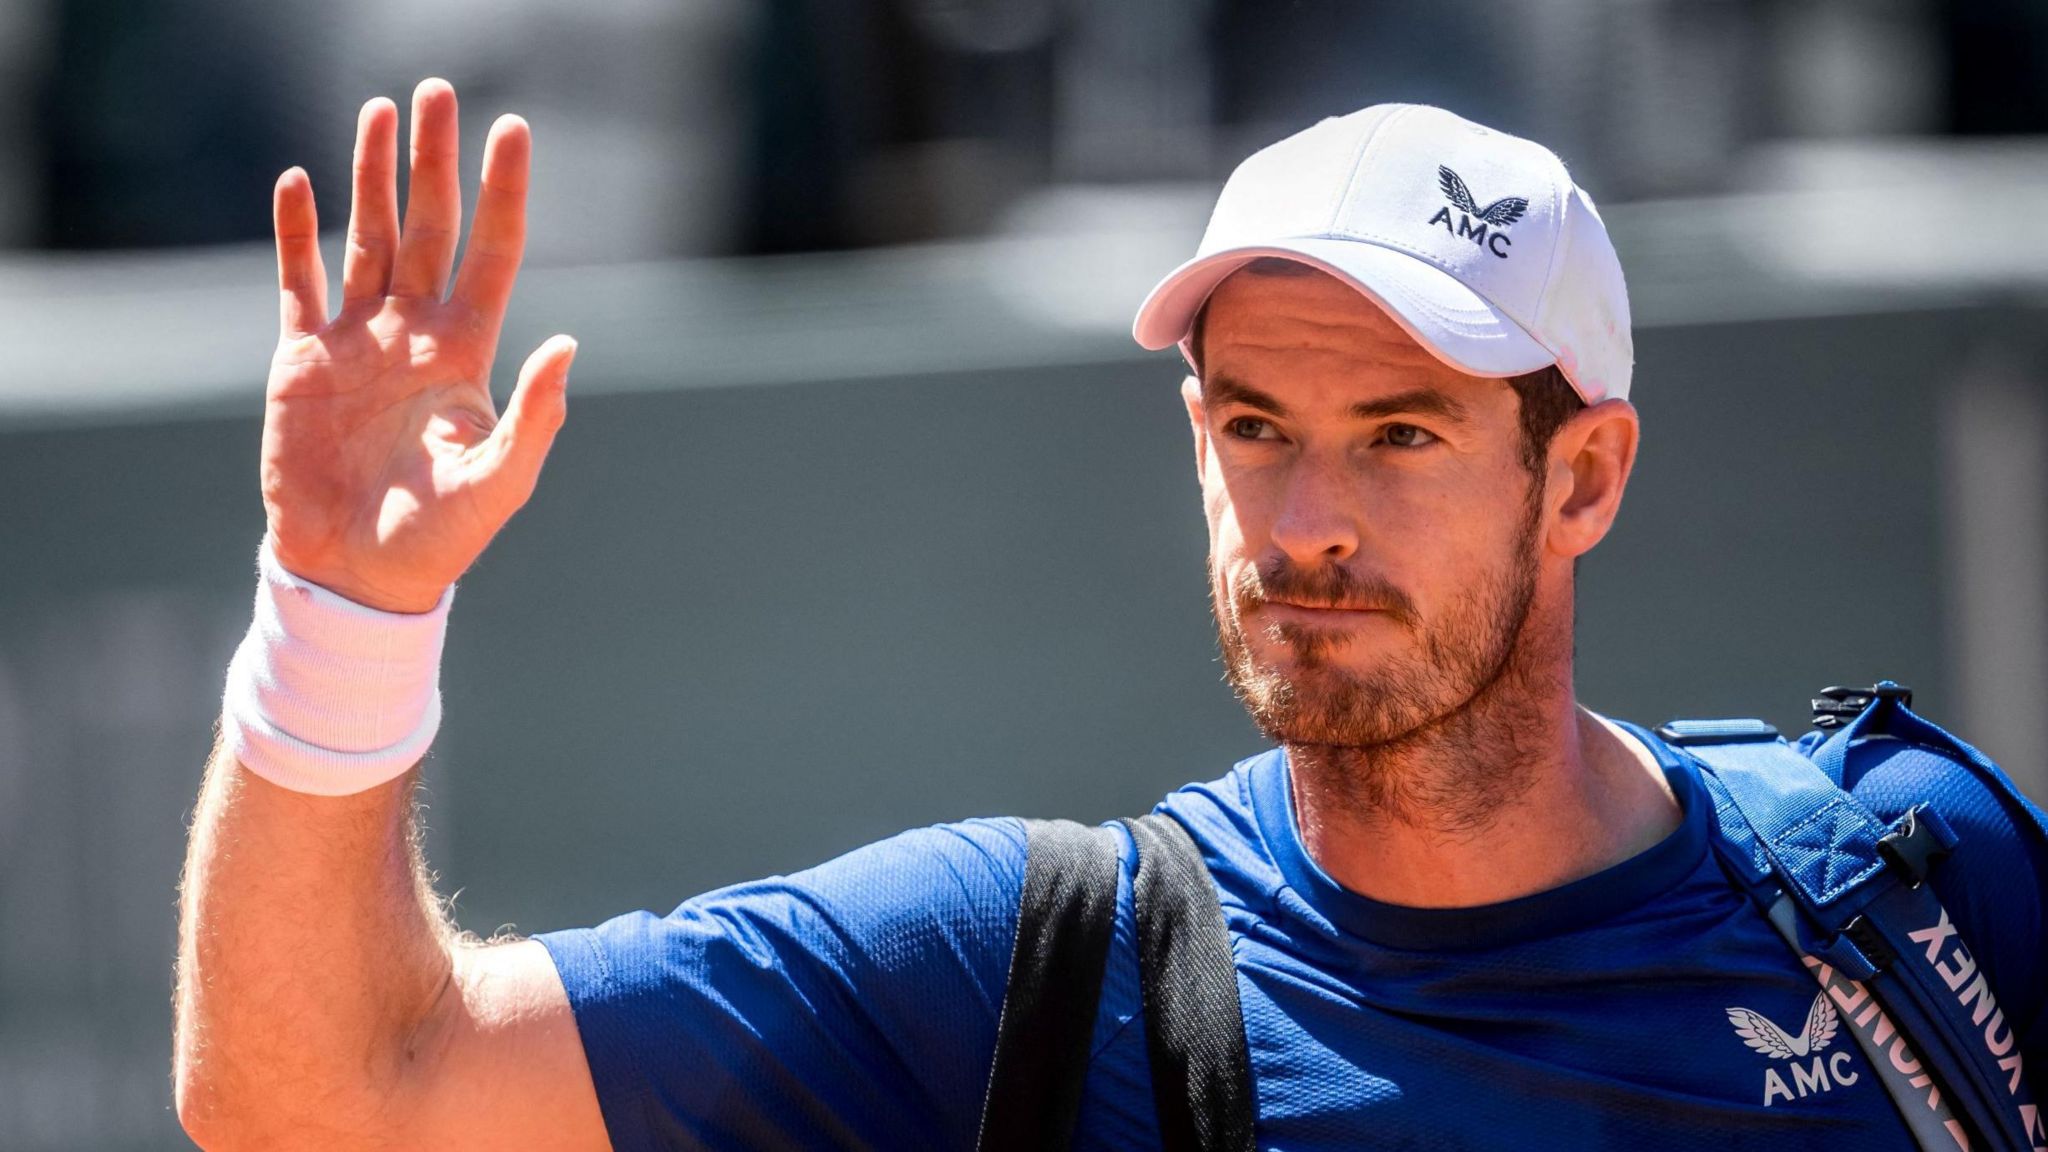 Andy Murray waves to fans